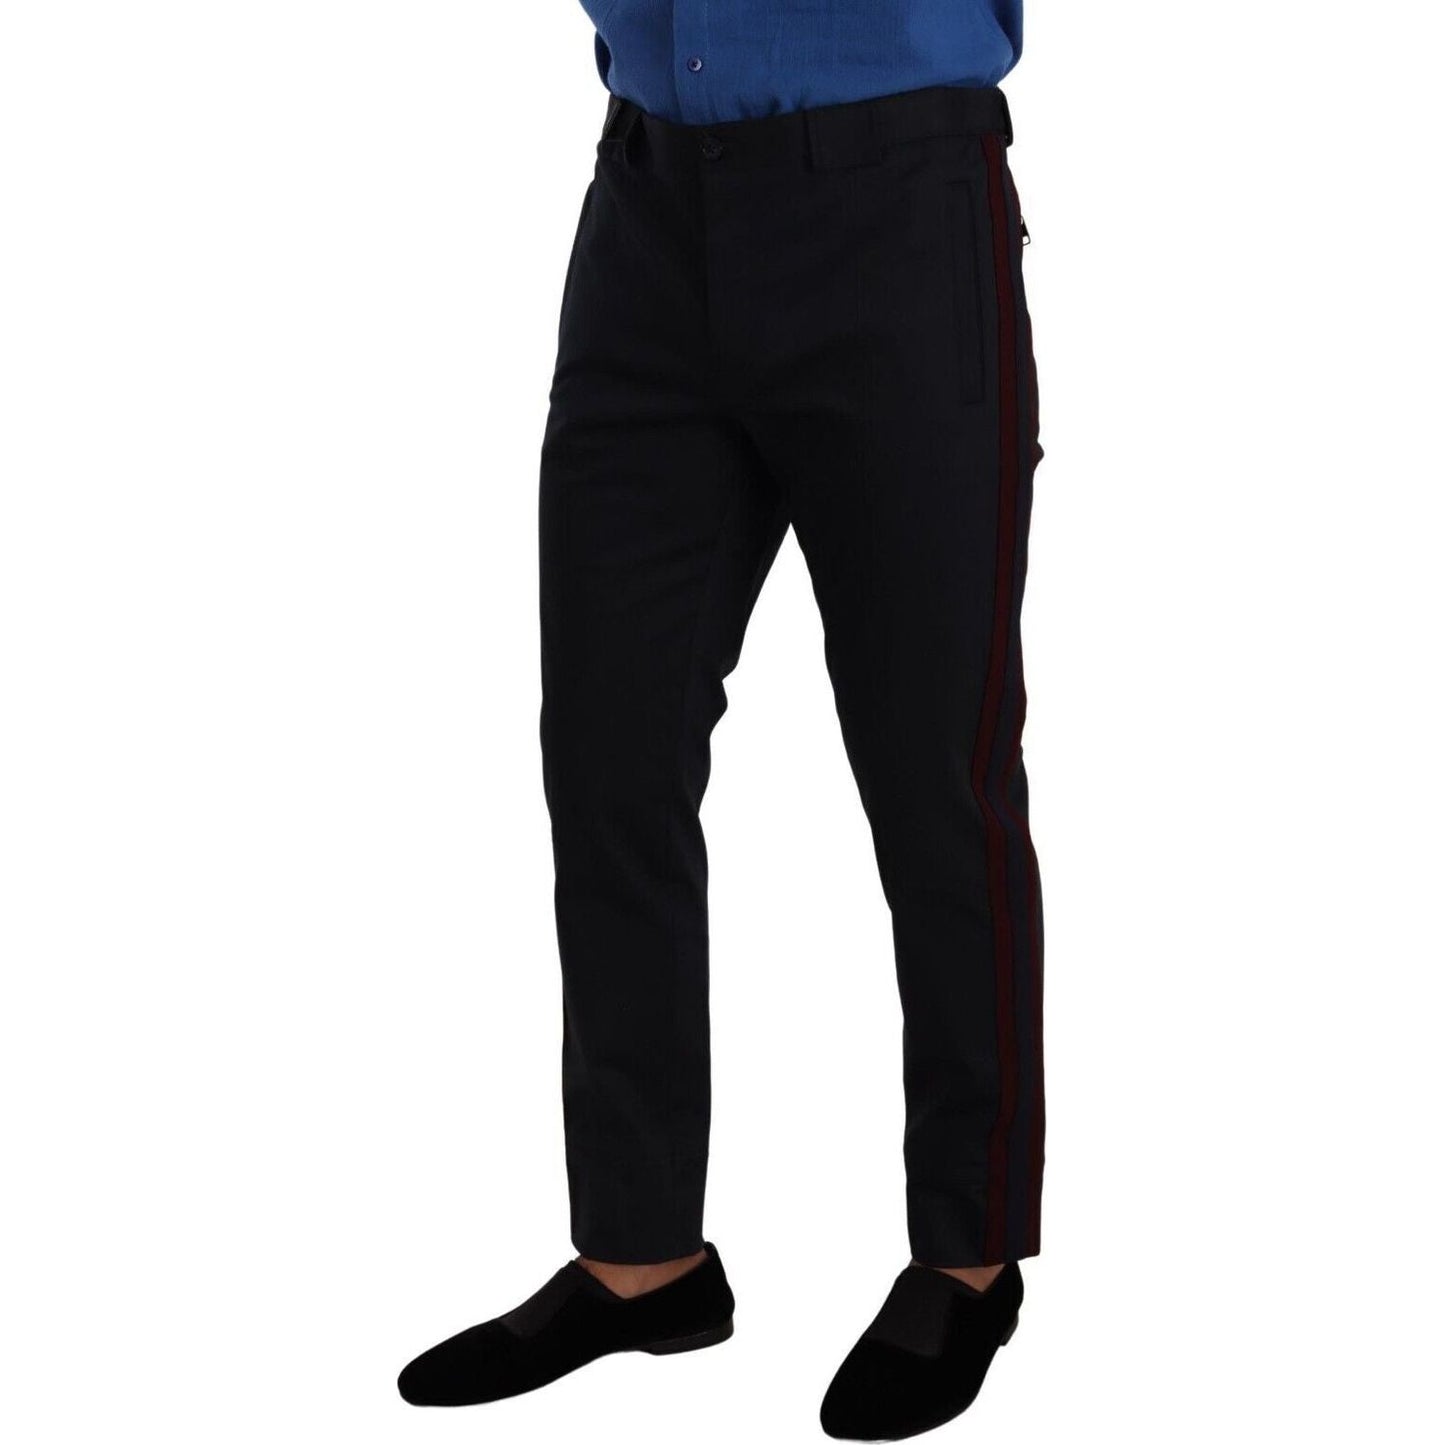 Dolce & Gabbana Chic Slim Fit Chinos Pants in Blue blue-bordeaux-cotton-skinny-chino-pants